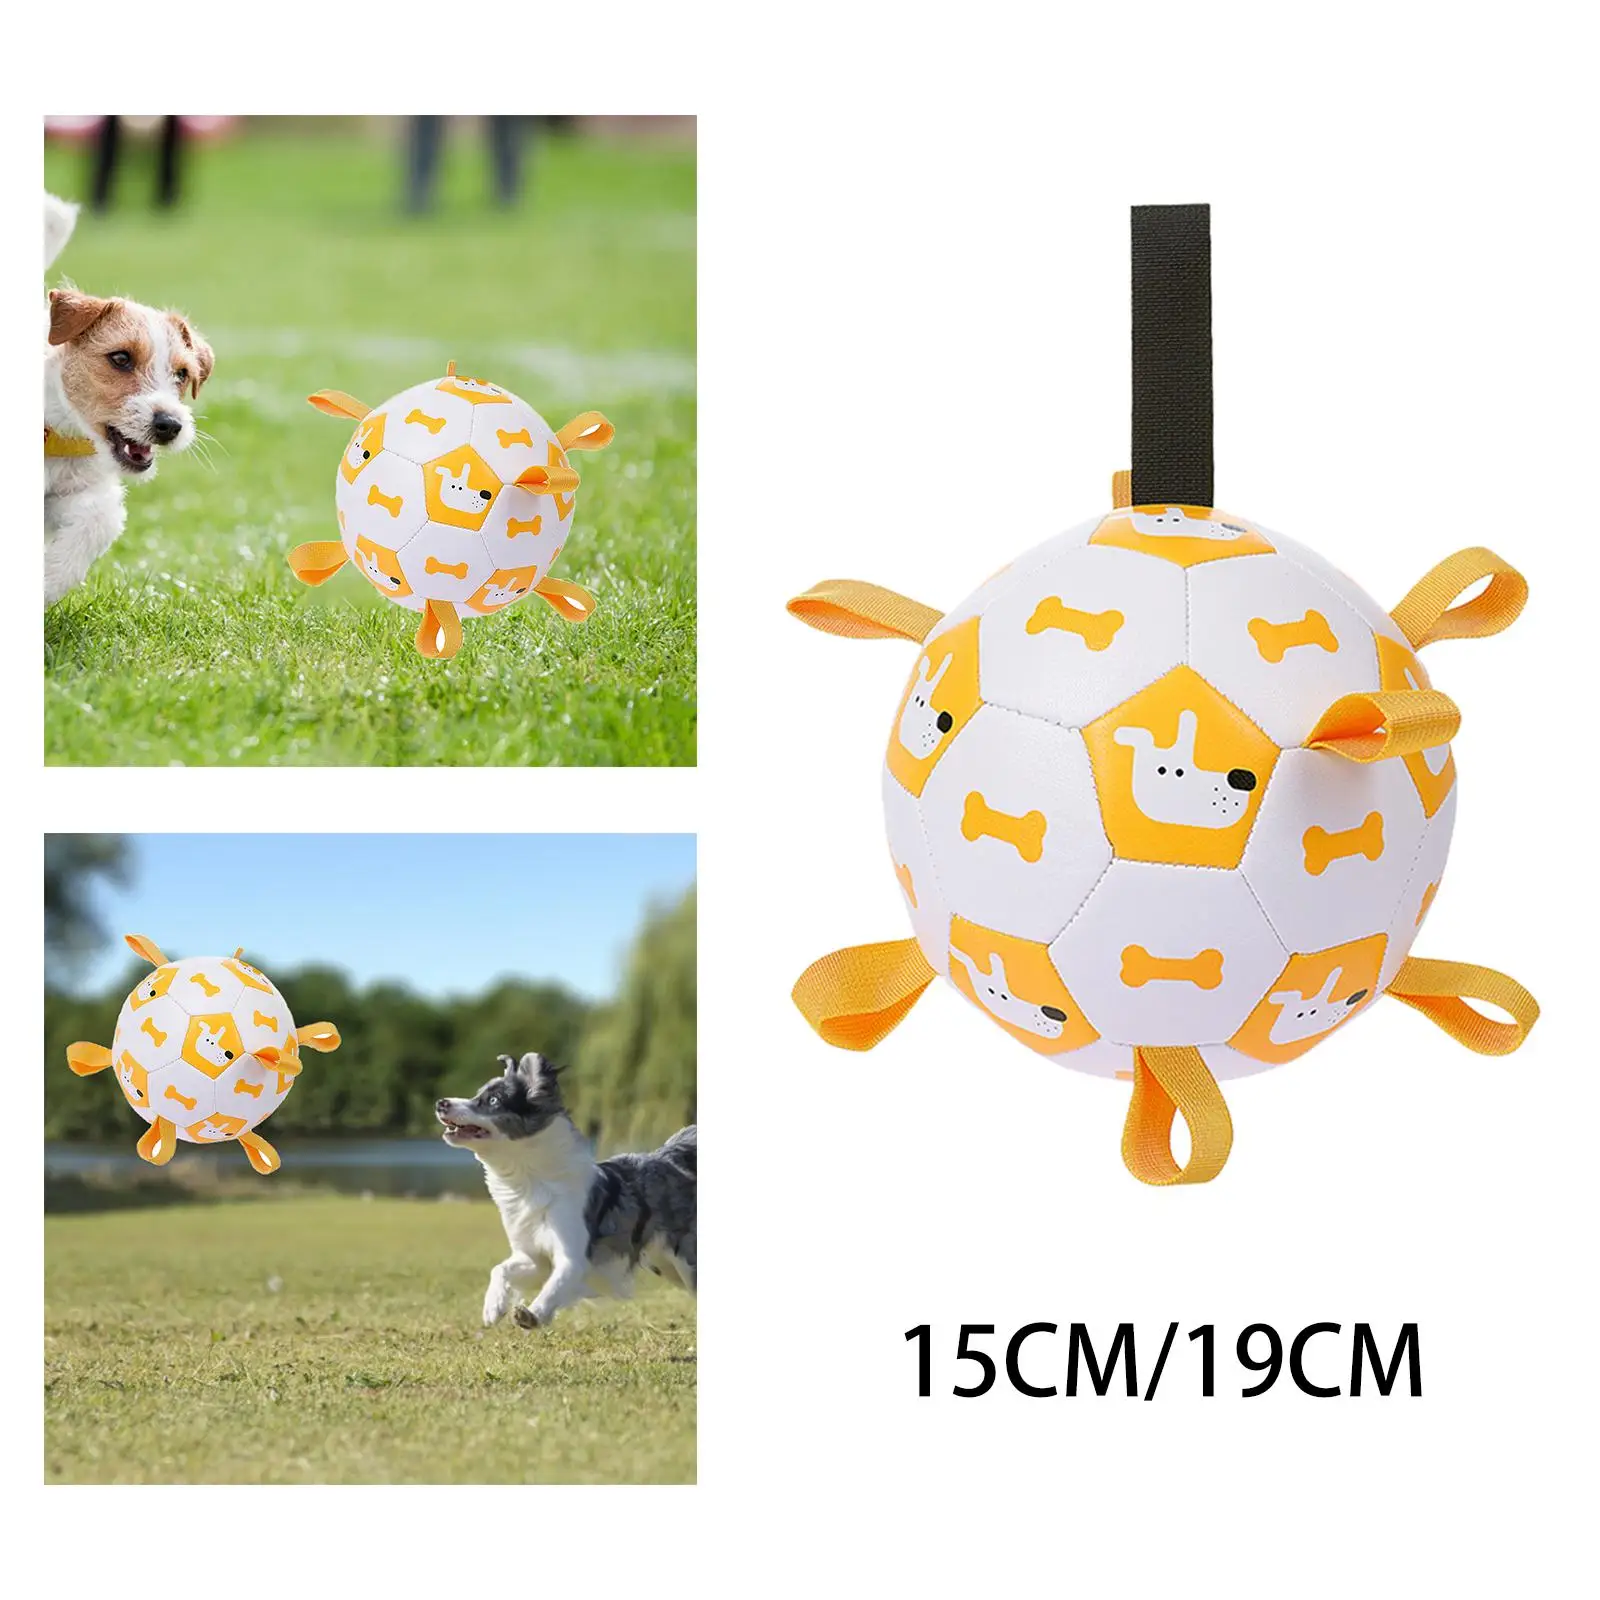 Soccer Ball Chew Toys Interactive Toys Playing Football for Small Medium Dog Puppy